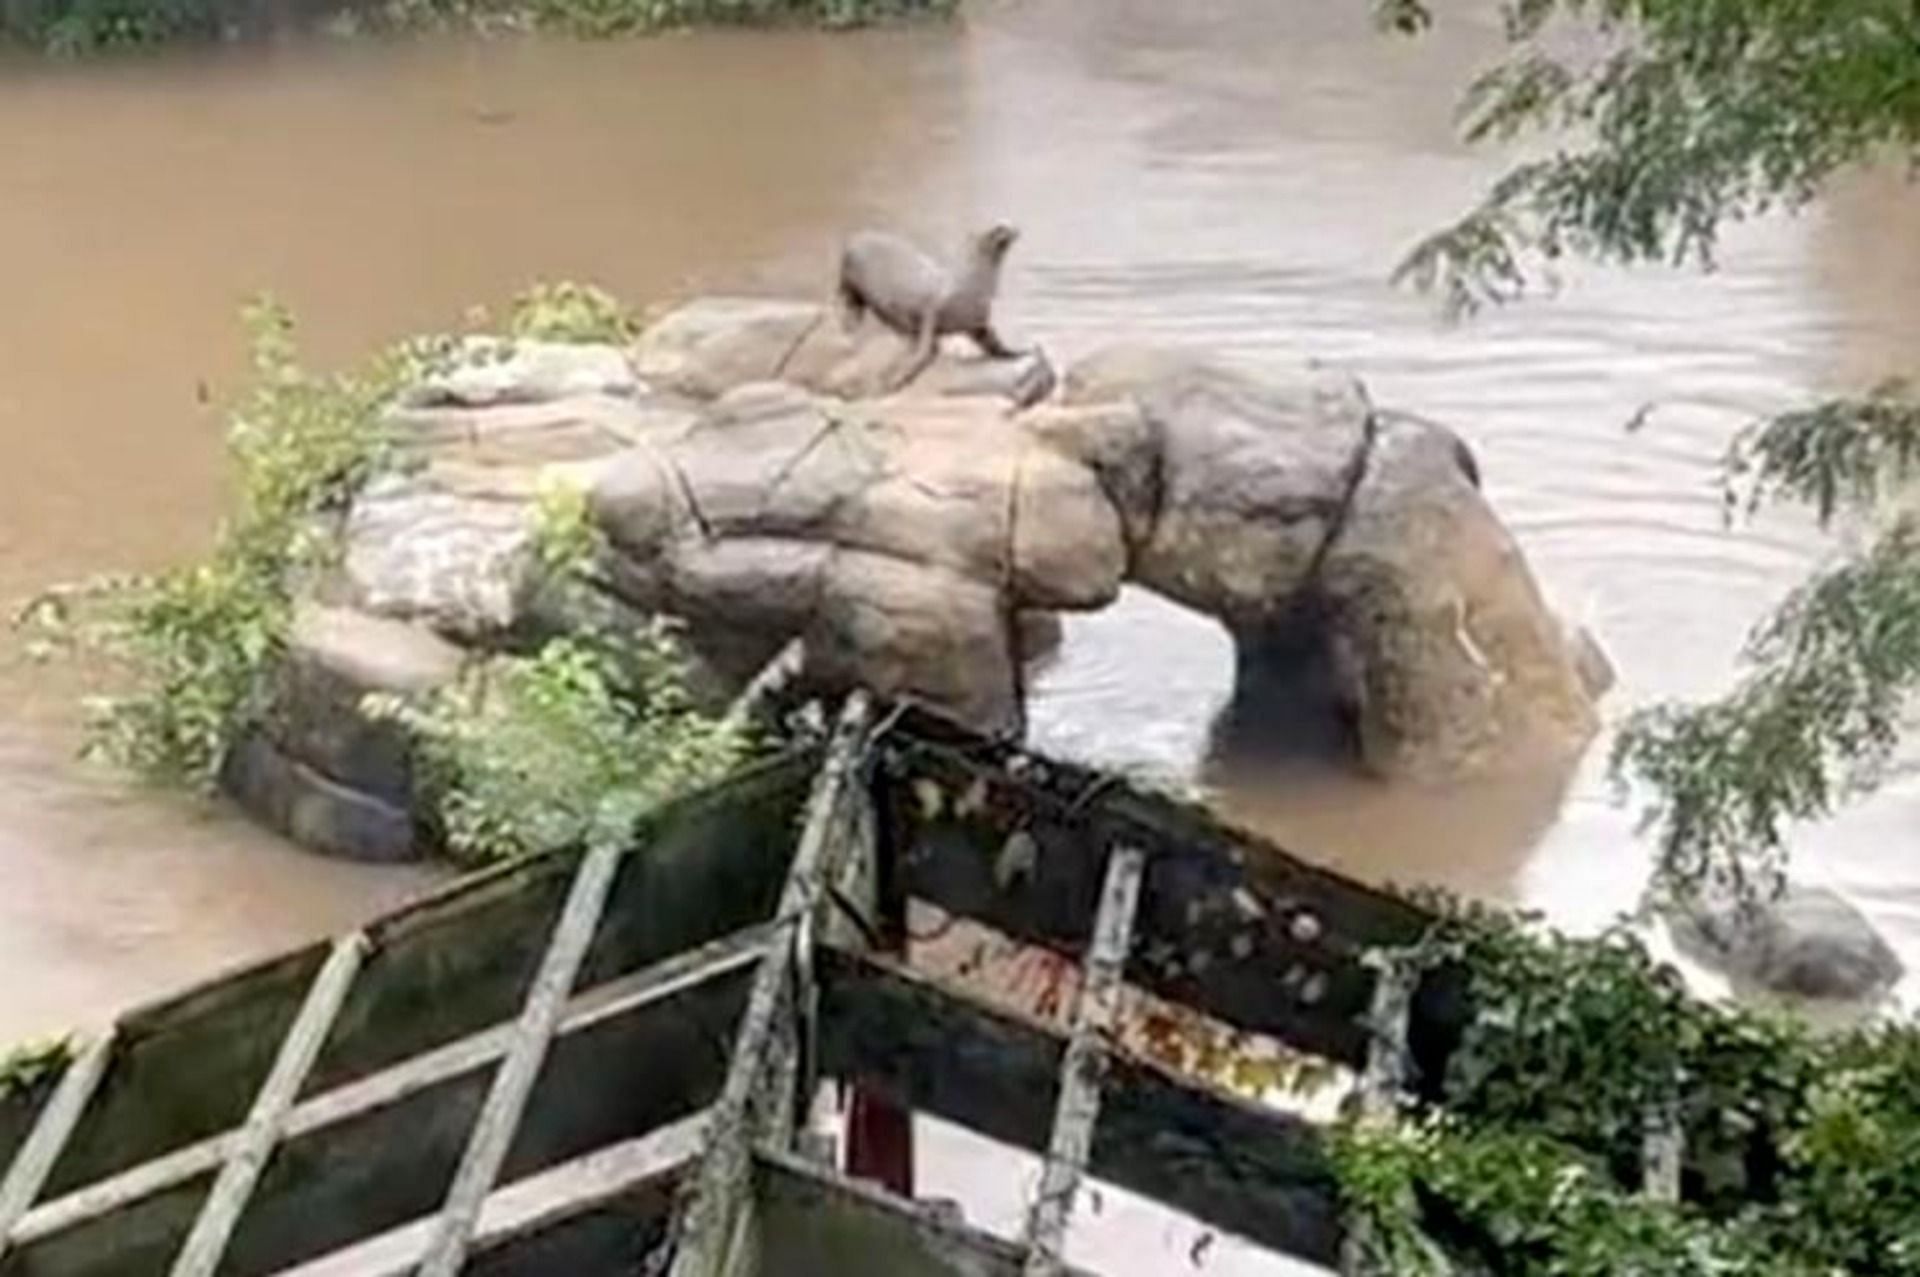 Social media users shared hilarious responses as the New York zoo announced that an animal escaped the pool during the flood. (Image via Central Park Zoo)